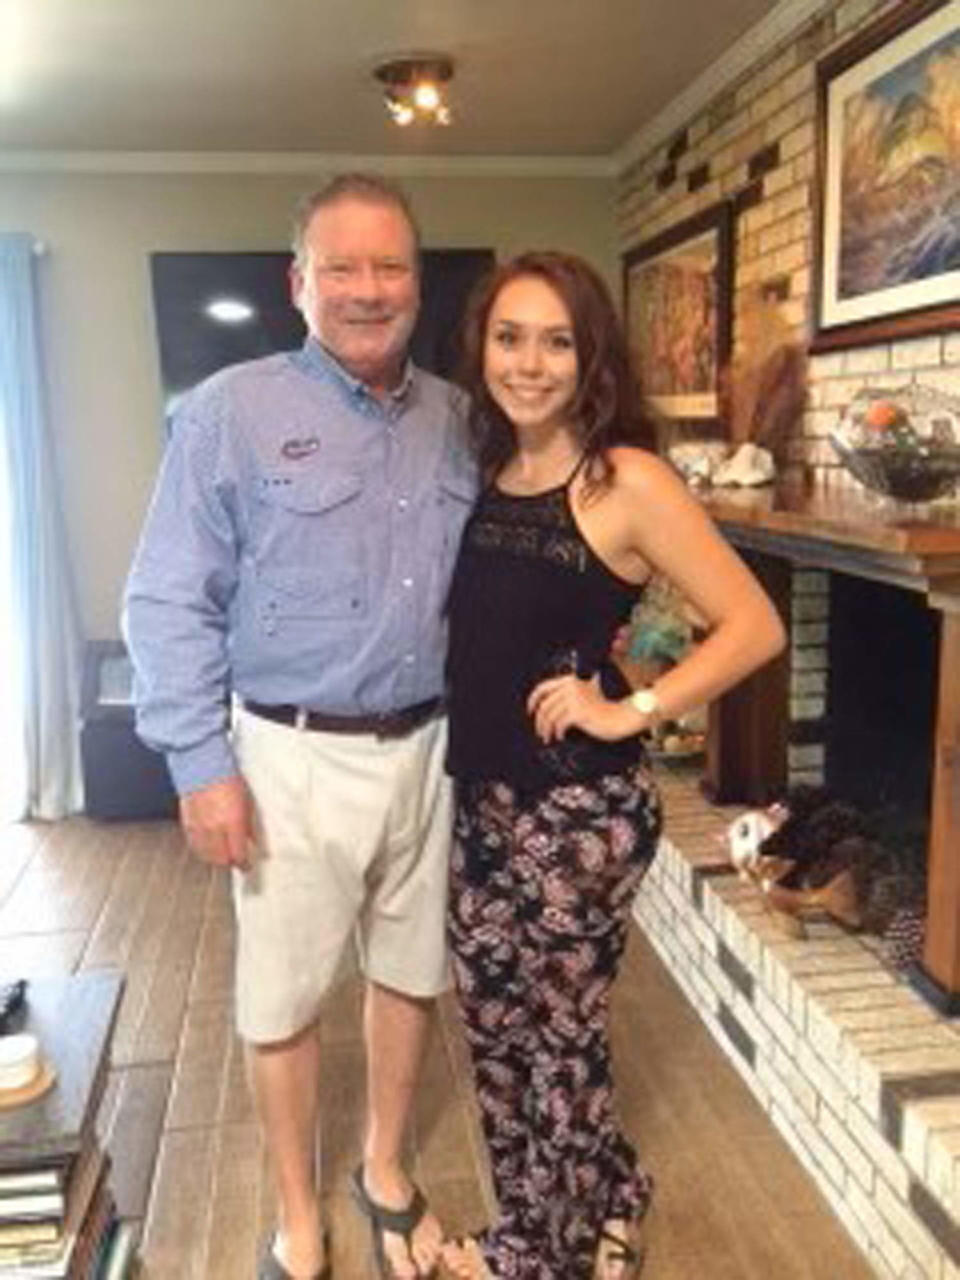 Dan Bennett, 59, credits TIL therapy with allowing him to beat the slim odds of long-term survival of stage 4 melanoma. His daughter, Faith Bennett, 29, first noticed a suspicious mole on Bennett's neck in 2011. (Courtesy Dan Bennett)